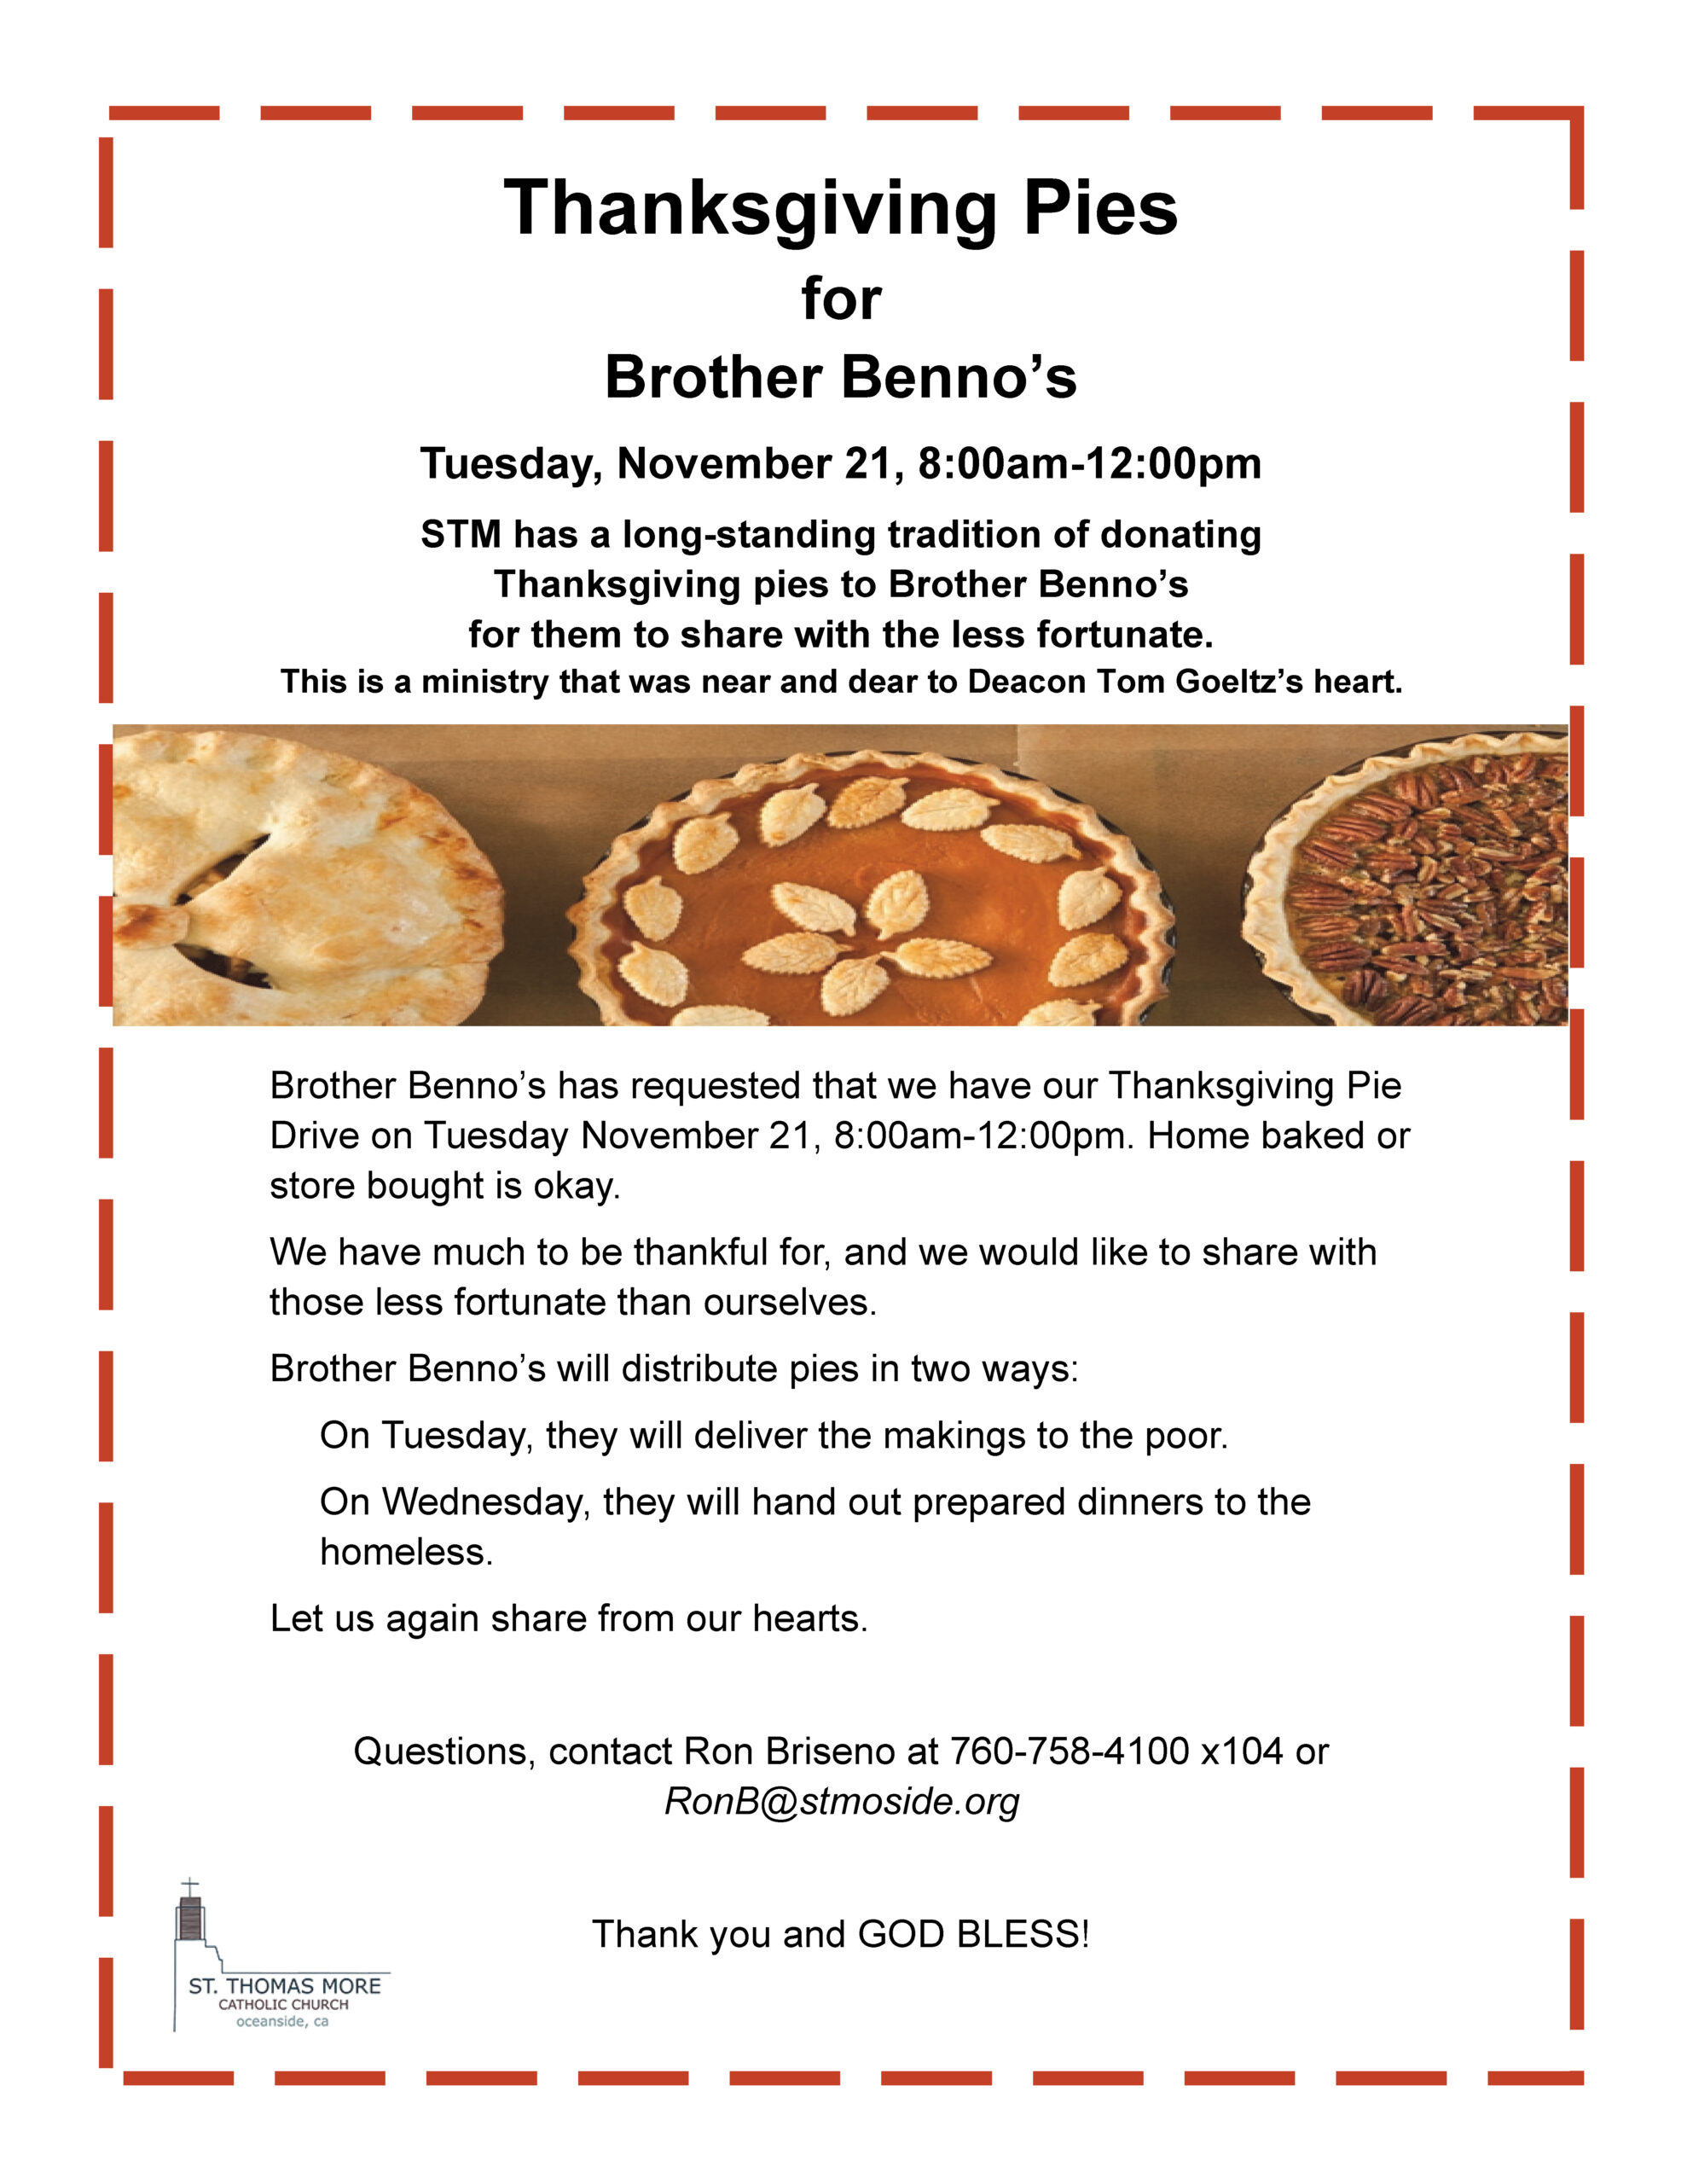 Thanksgiving Pies for Brother Benno’s Nov 21